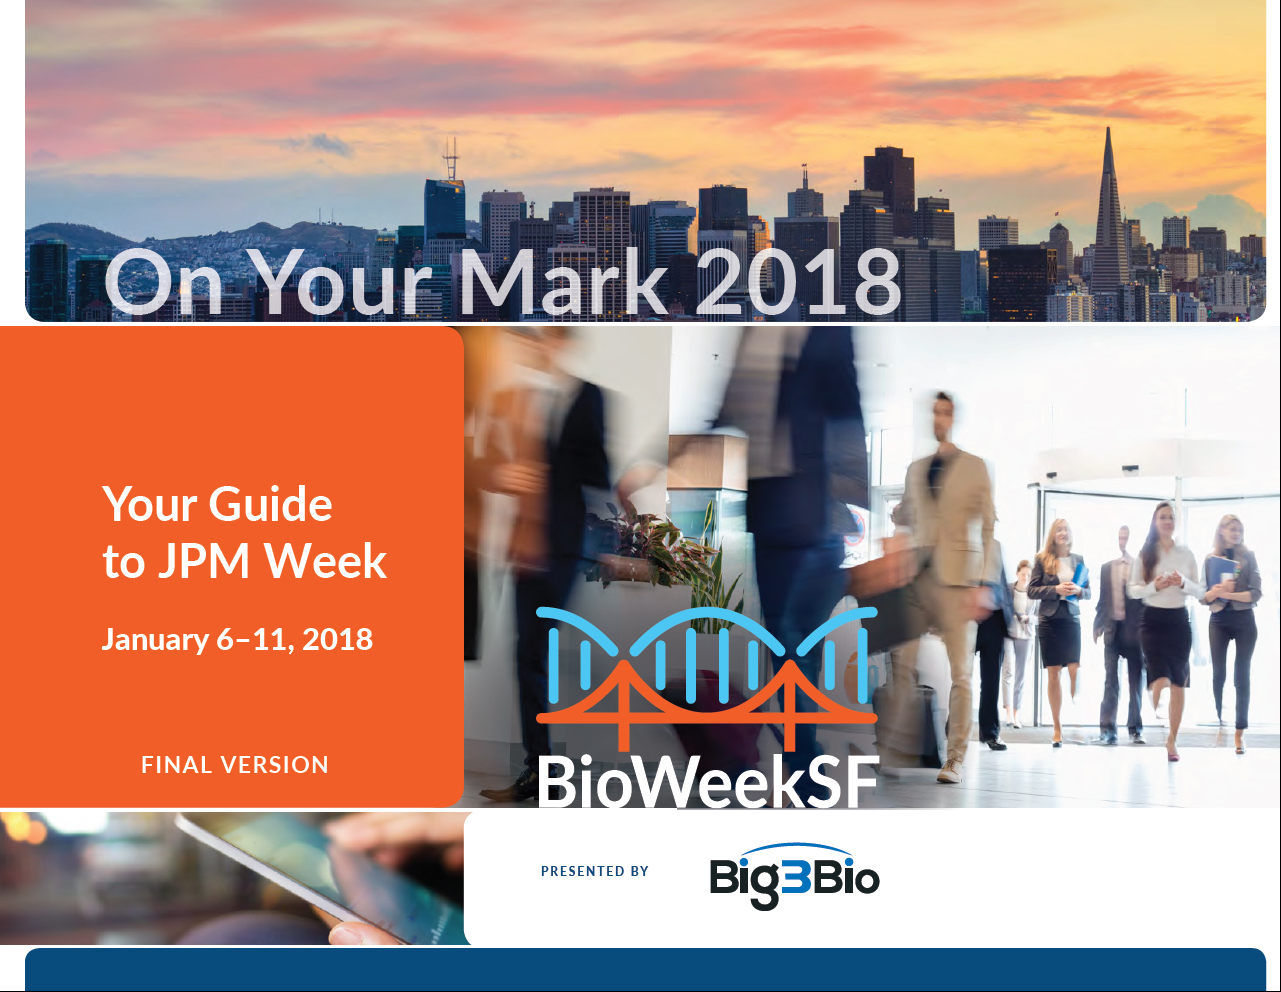 On Your Mark 2018: <br>The Guide to JPM Week